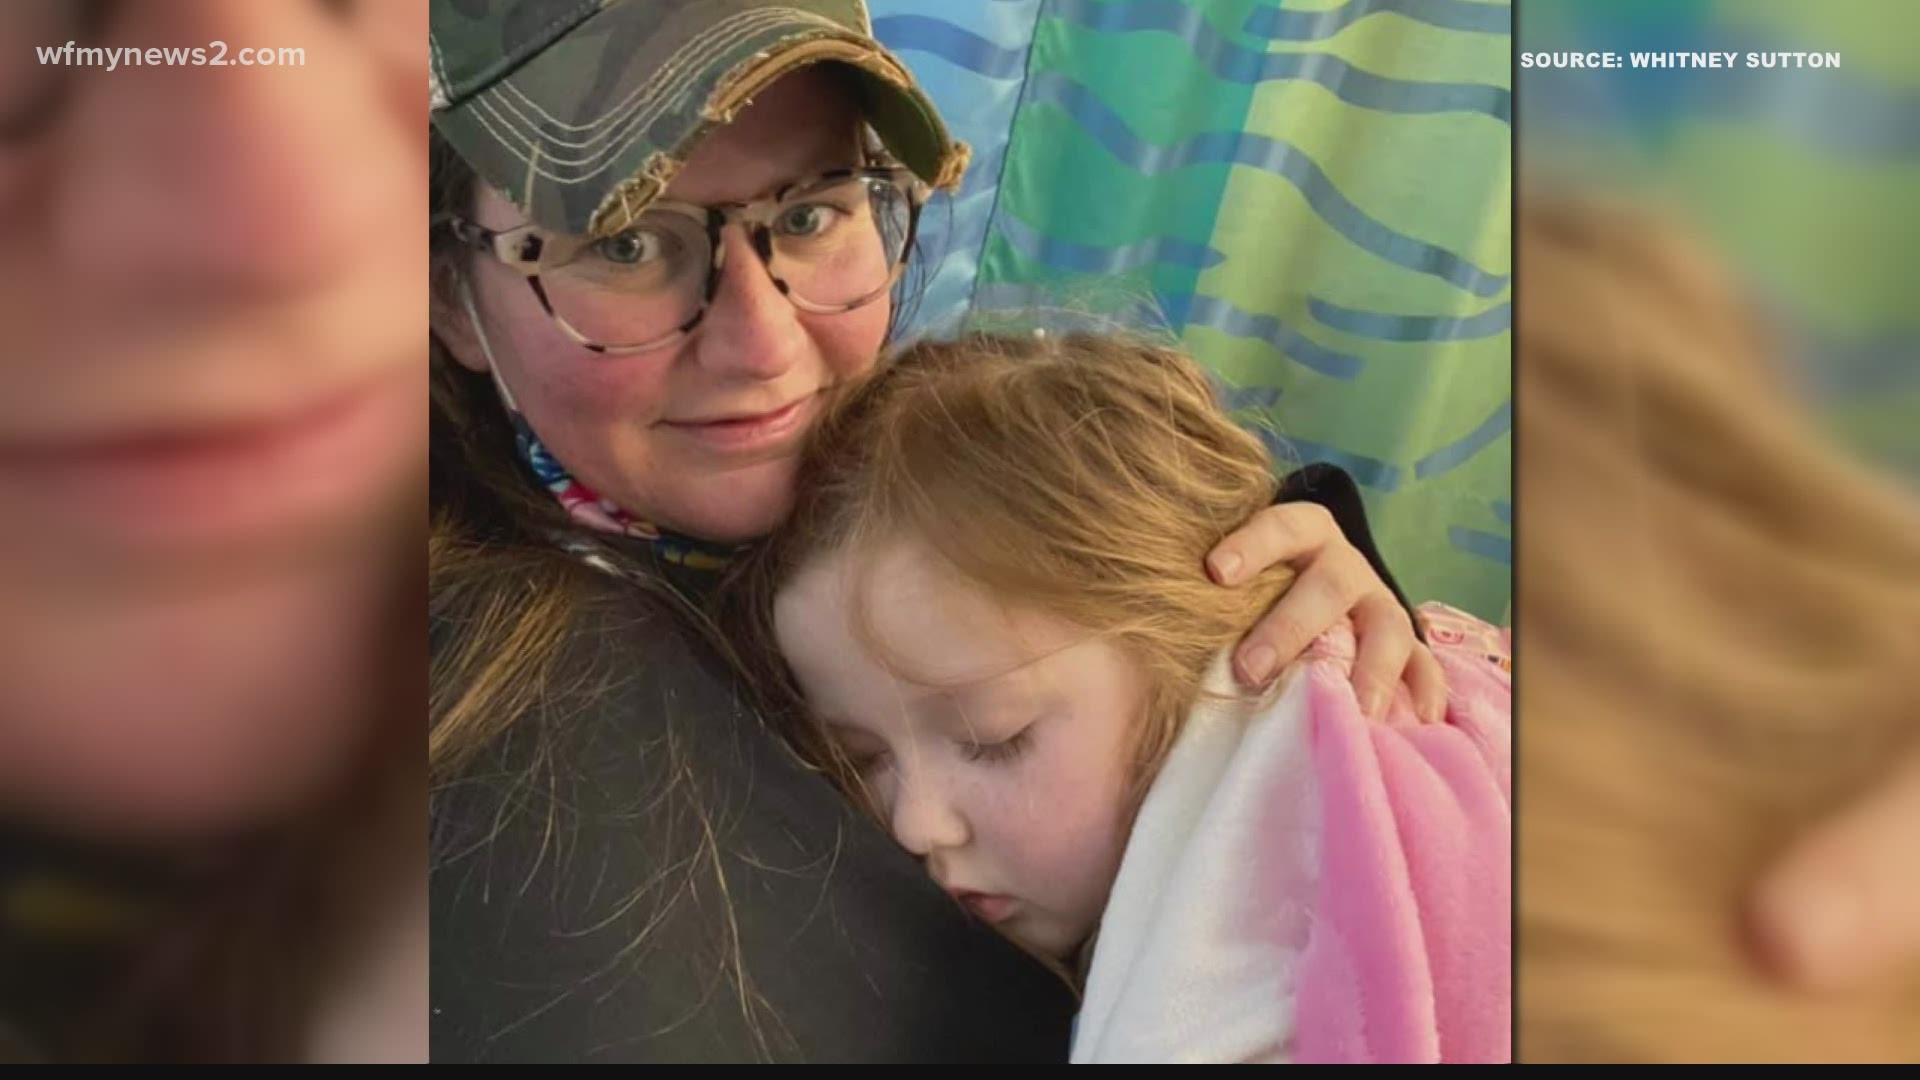 The Sutton family hasn't been home in 16 days. Instead, they've been in the hospital, with their daughter, who's fighting cancer. But they aren't letting that ruin t